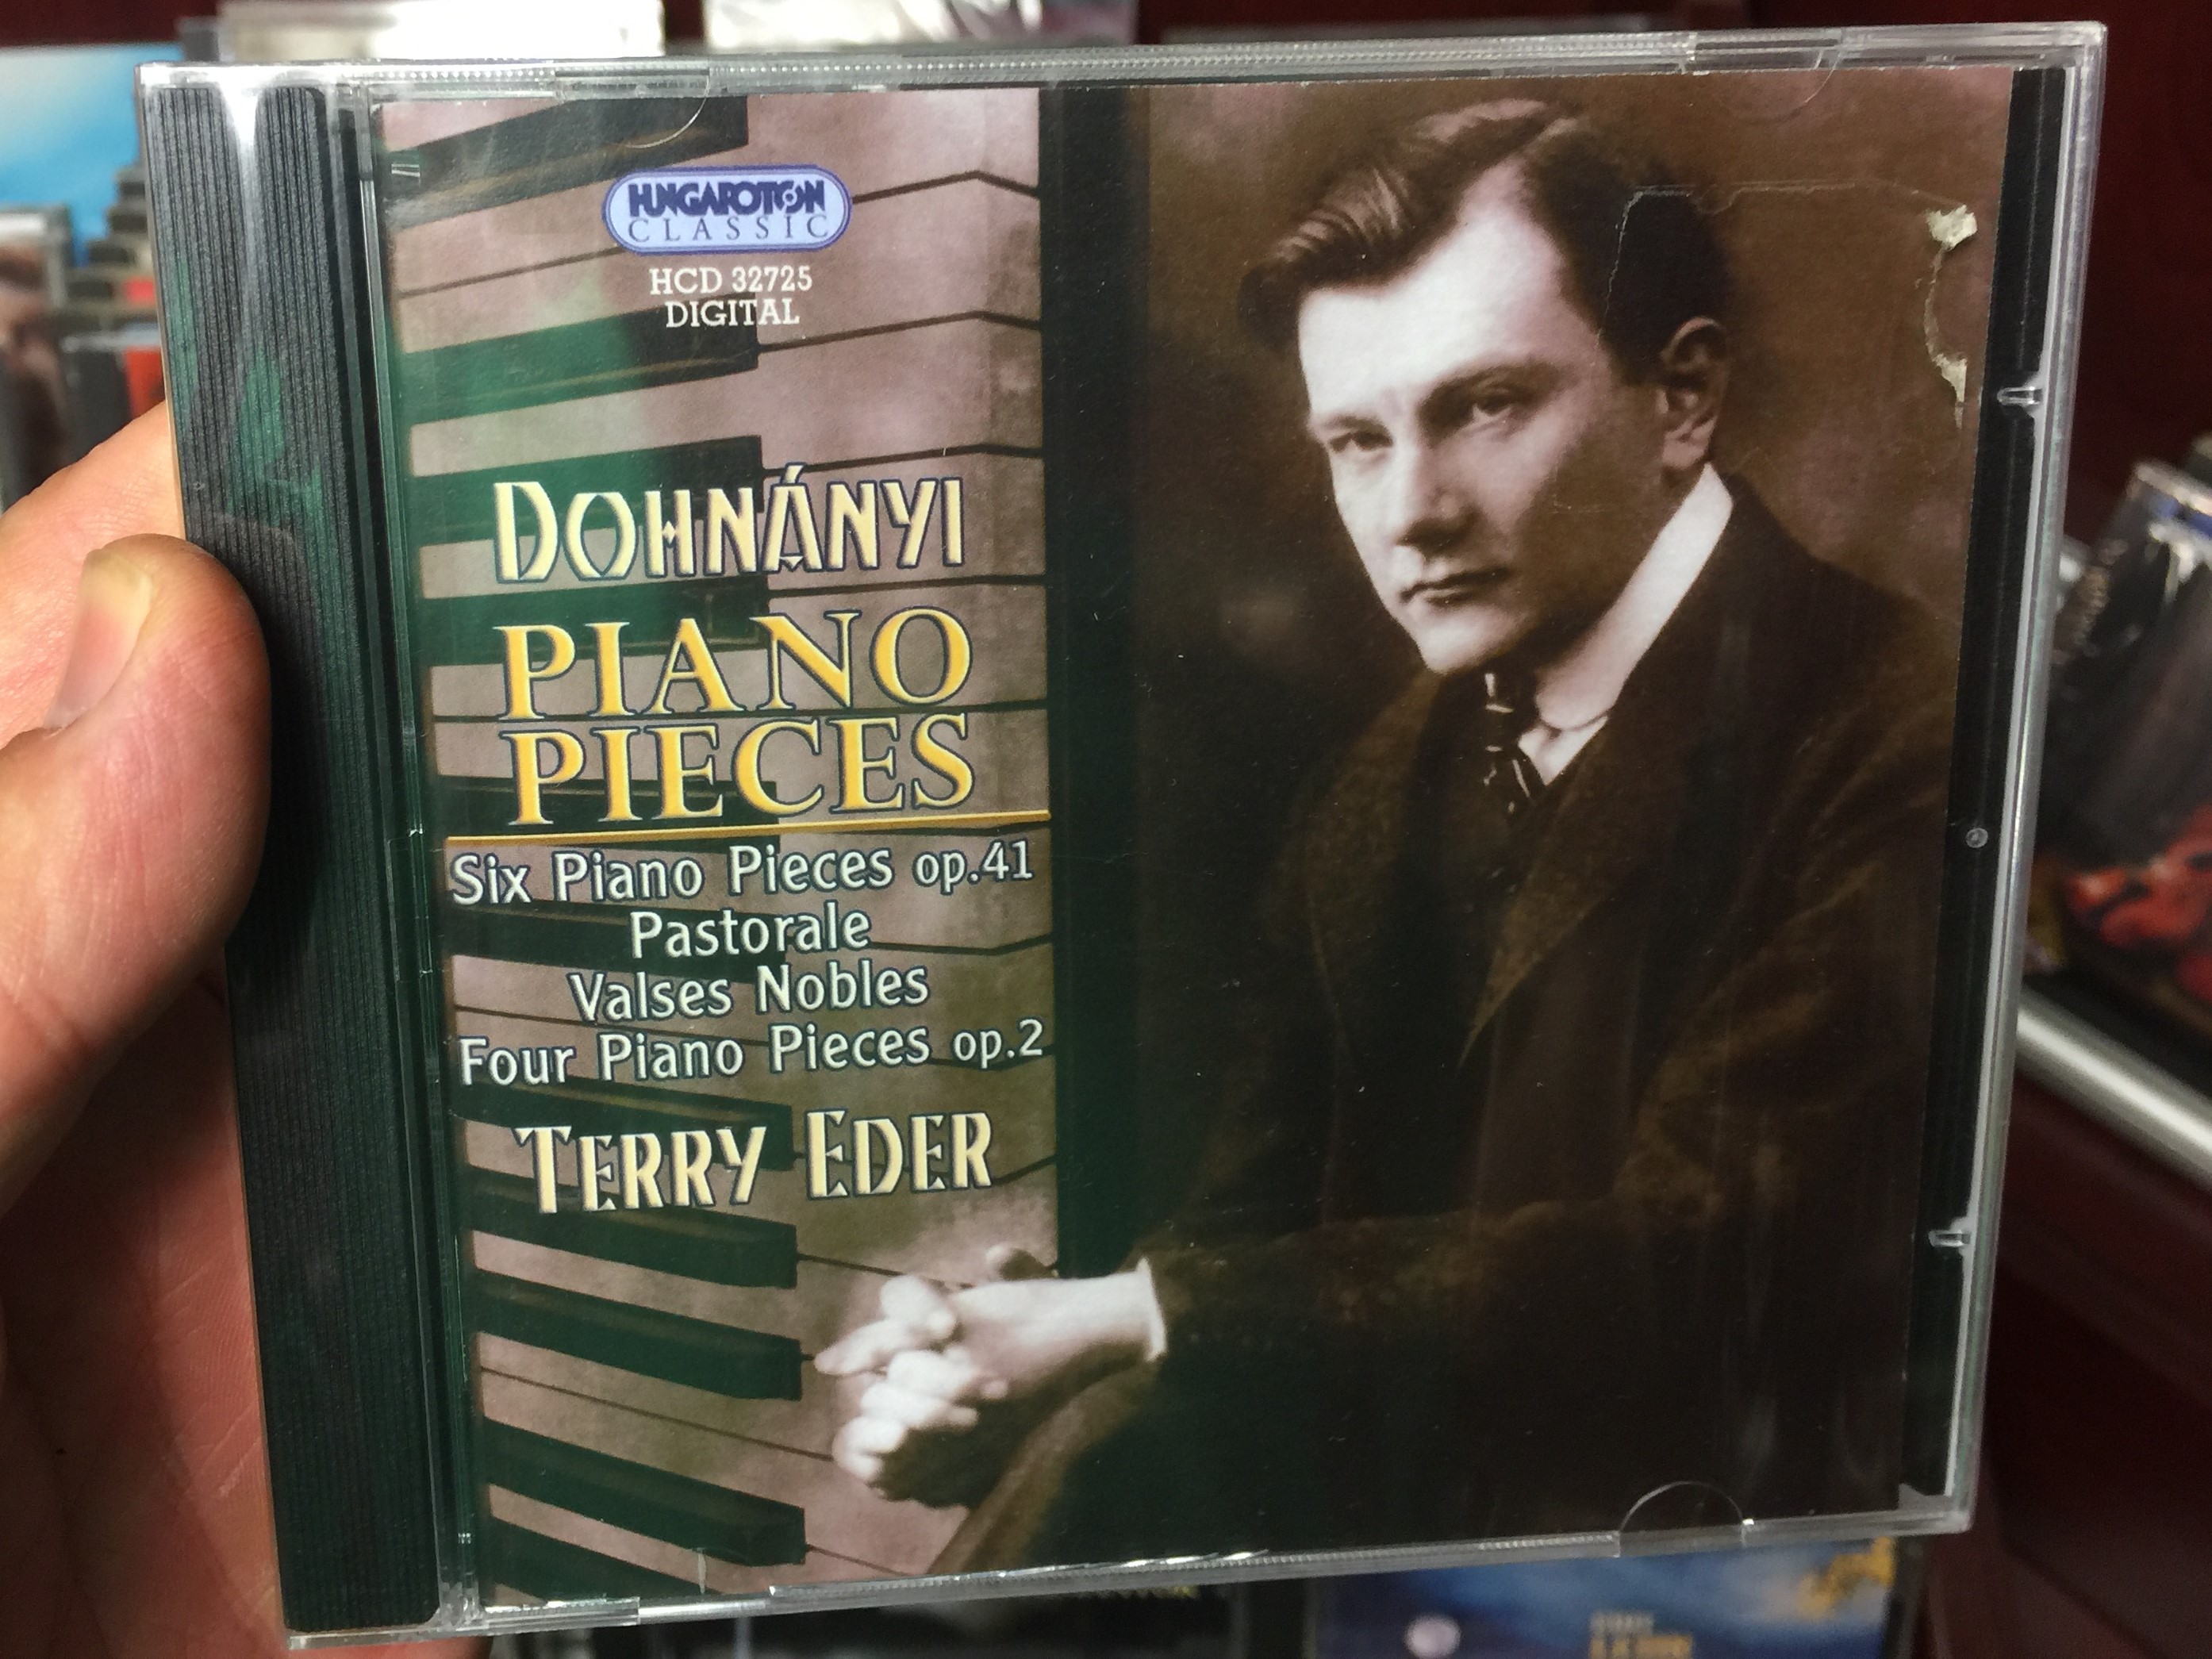 dohnanyi-piano-pieces-six-piano-pieces-op.-41-pastorale-valses-nobles-four-piano-pieces-op.-2-terry-eder-hungaroton-classic-audio-cd-2012-stereo-hcd-32725-1-.jpg